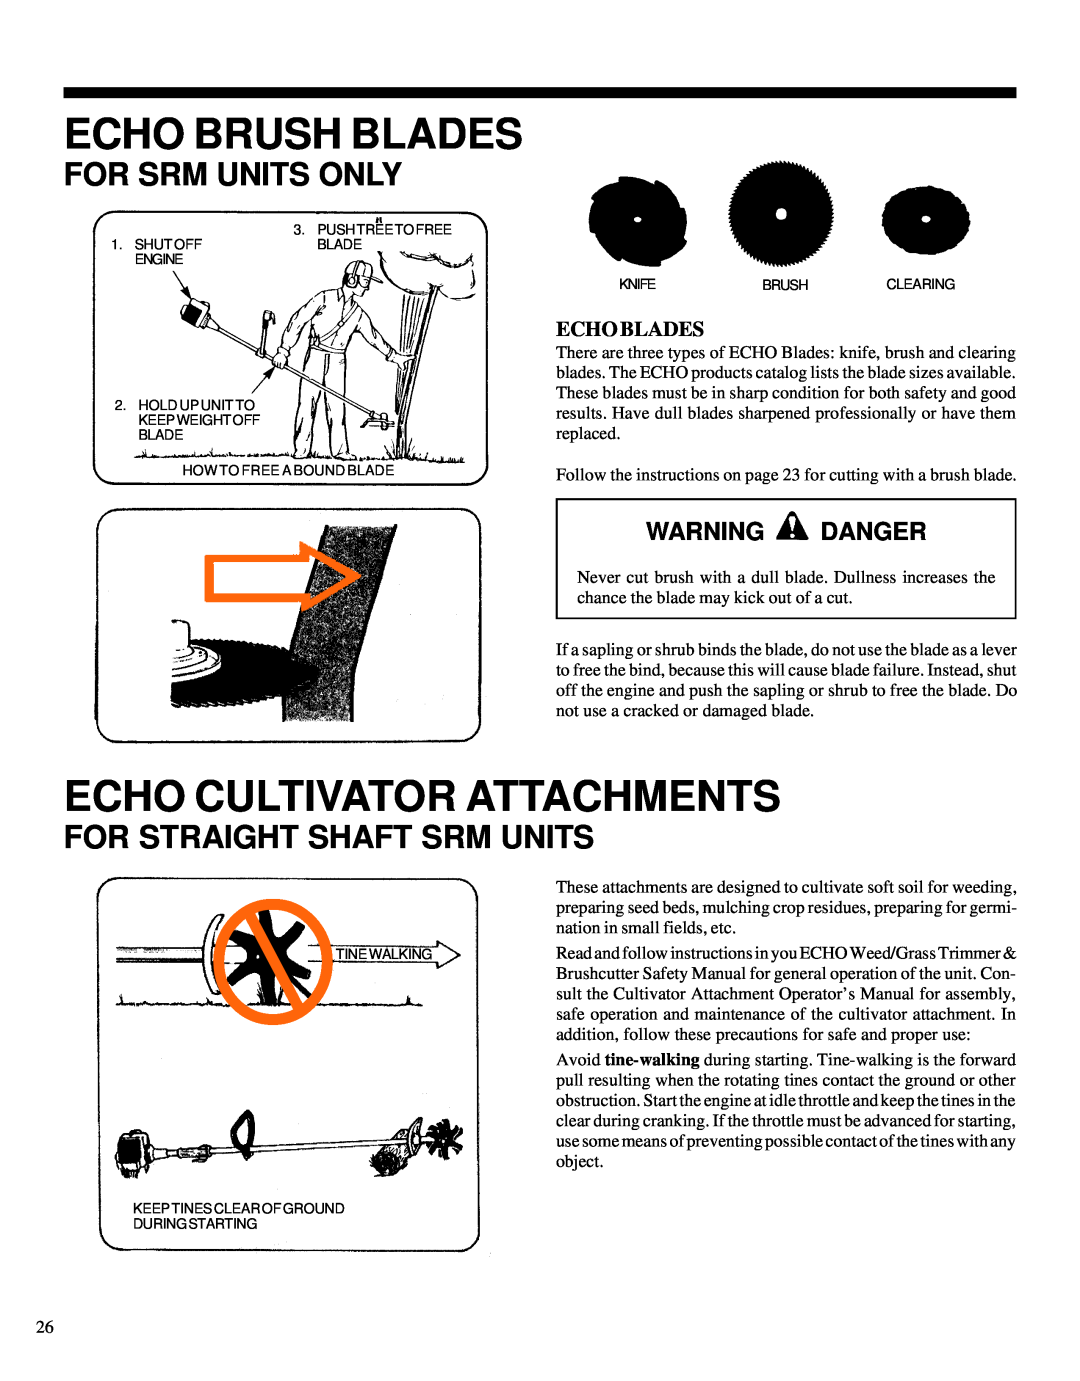 Echo GRASS/WEED TRIMMER BRUSHCUTTER and CLEARING SAW manual Echo Brush Blades, Echo Cultivator Attachments, Echo Blades 